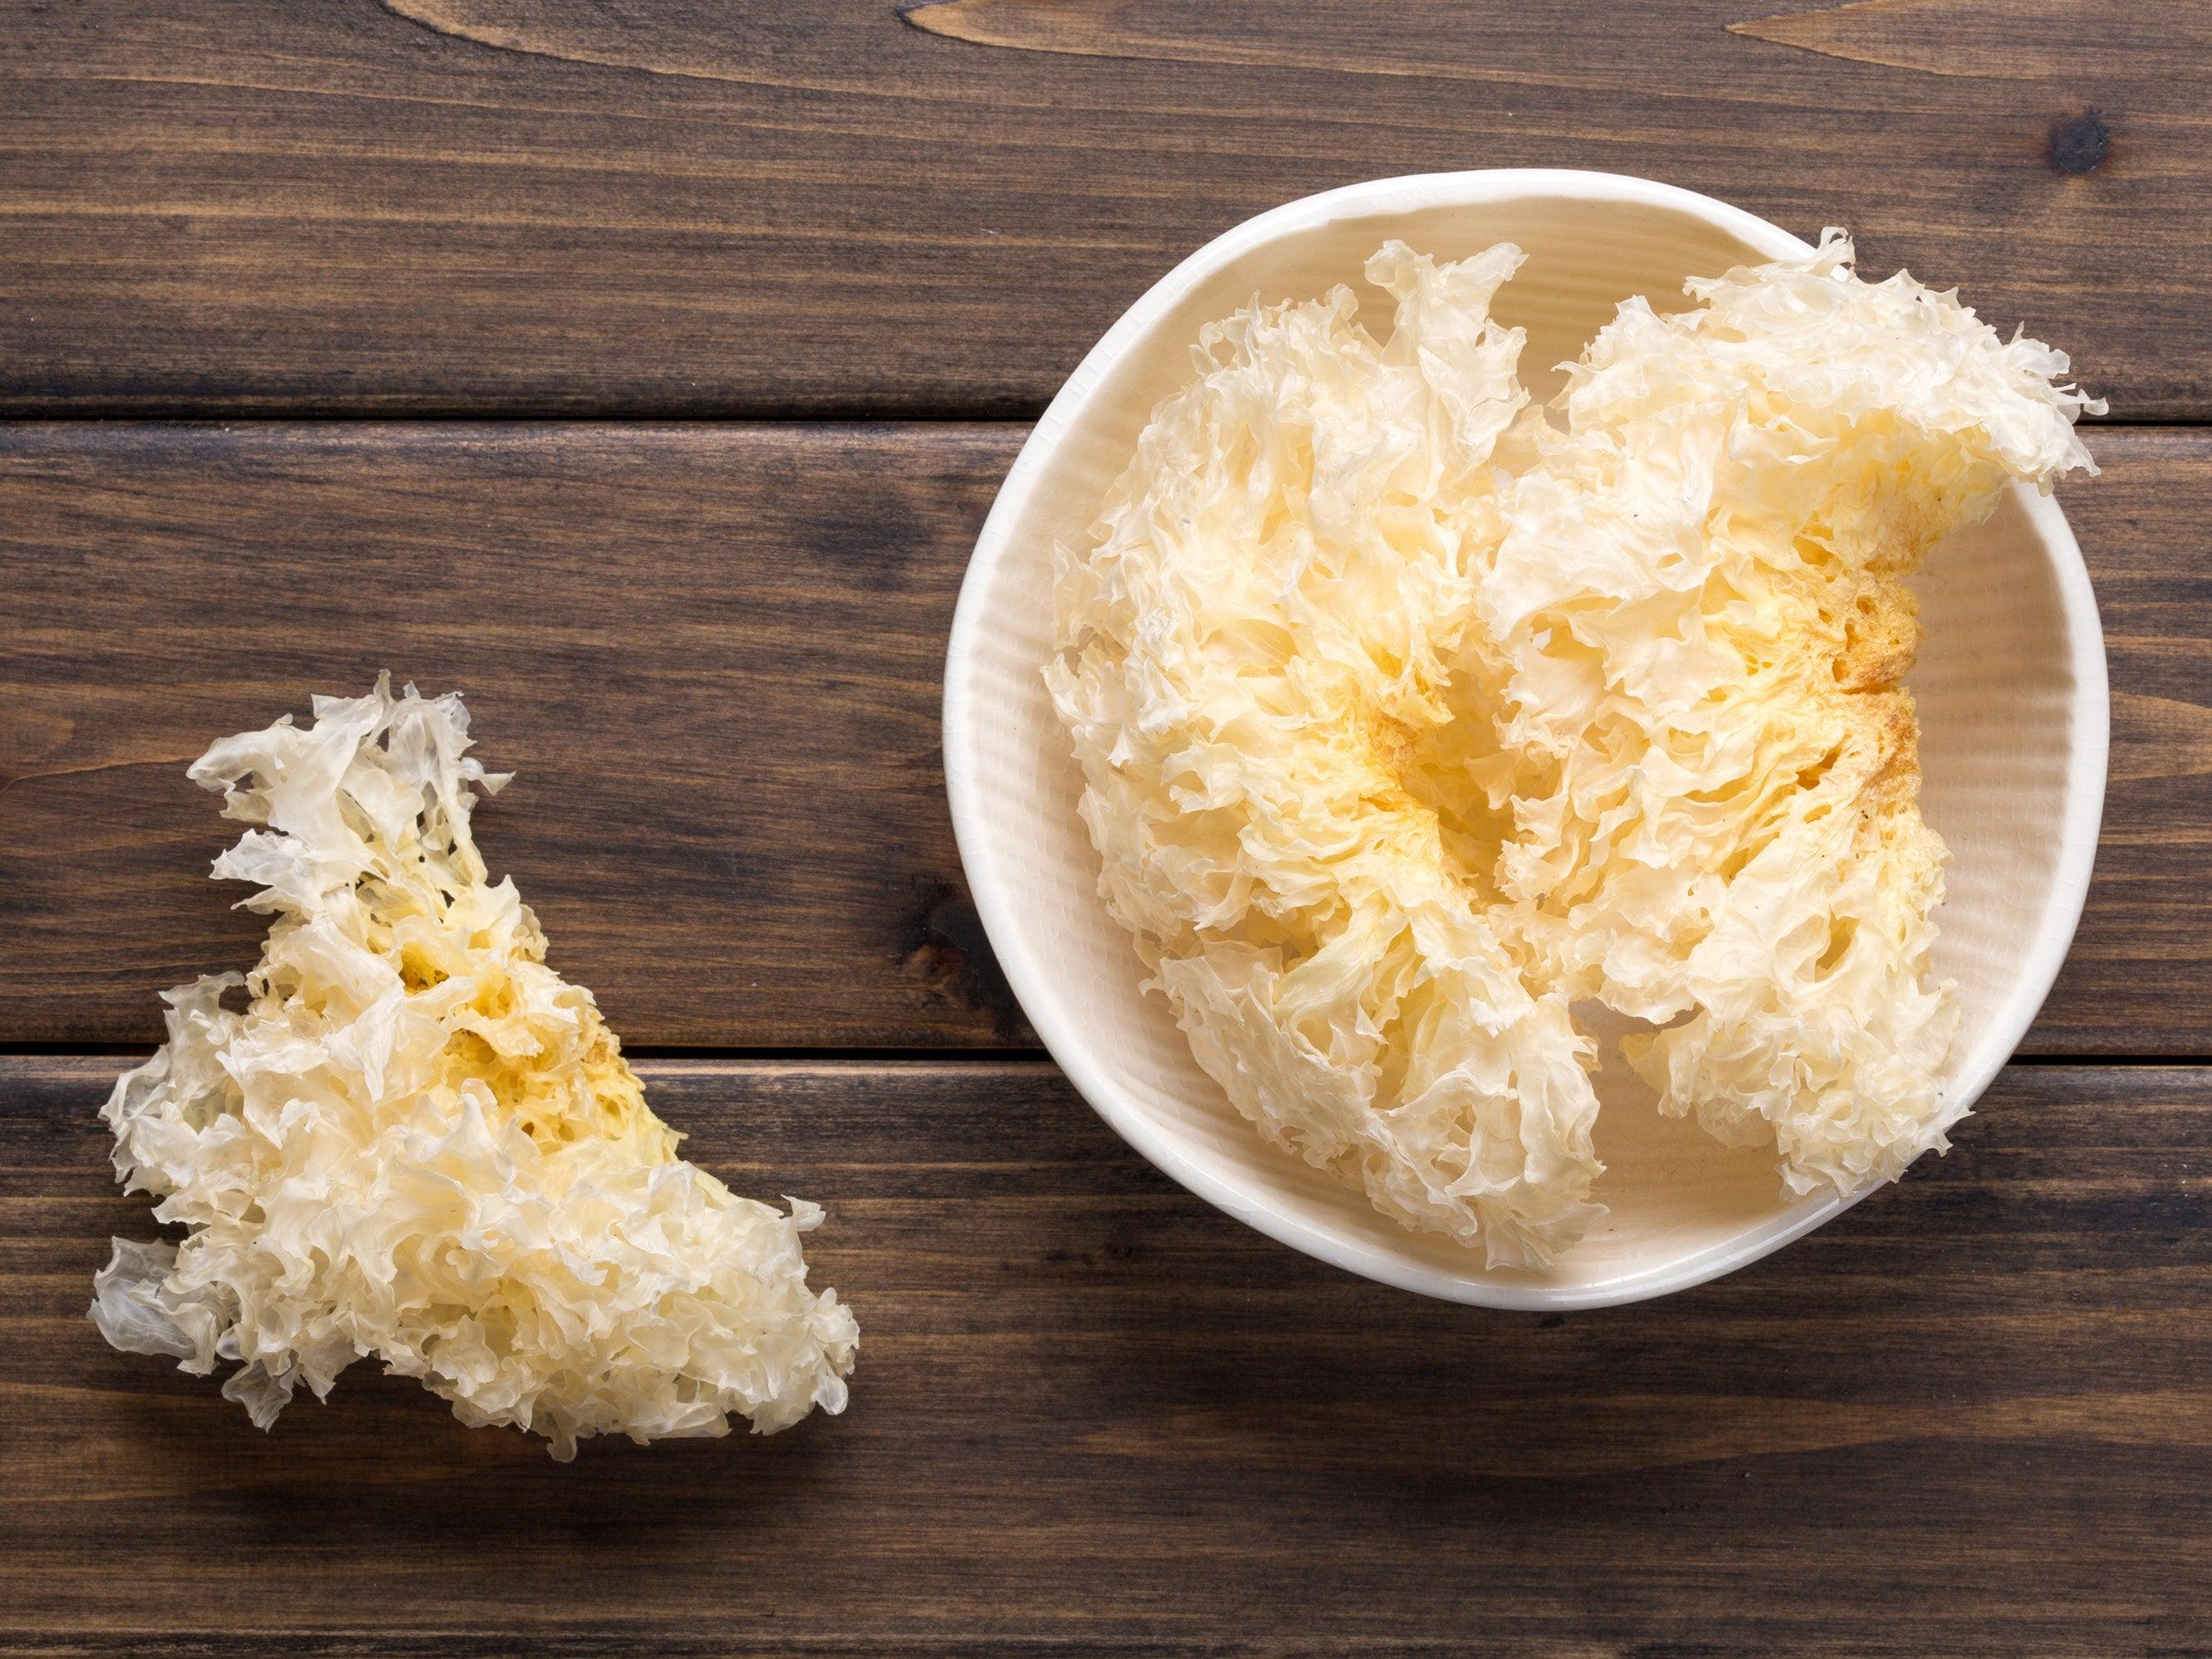 Tremella Mushroom: A Natural Beauty Ingredient With Tremendous Benefits - My Beauty Luv